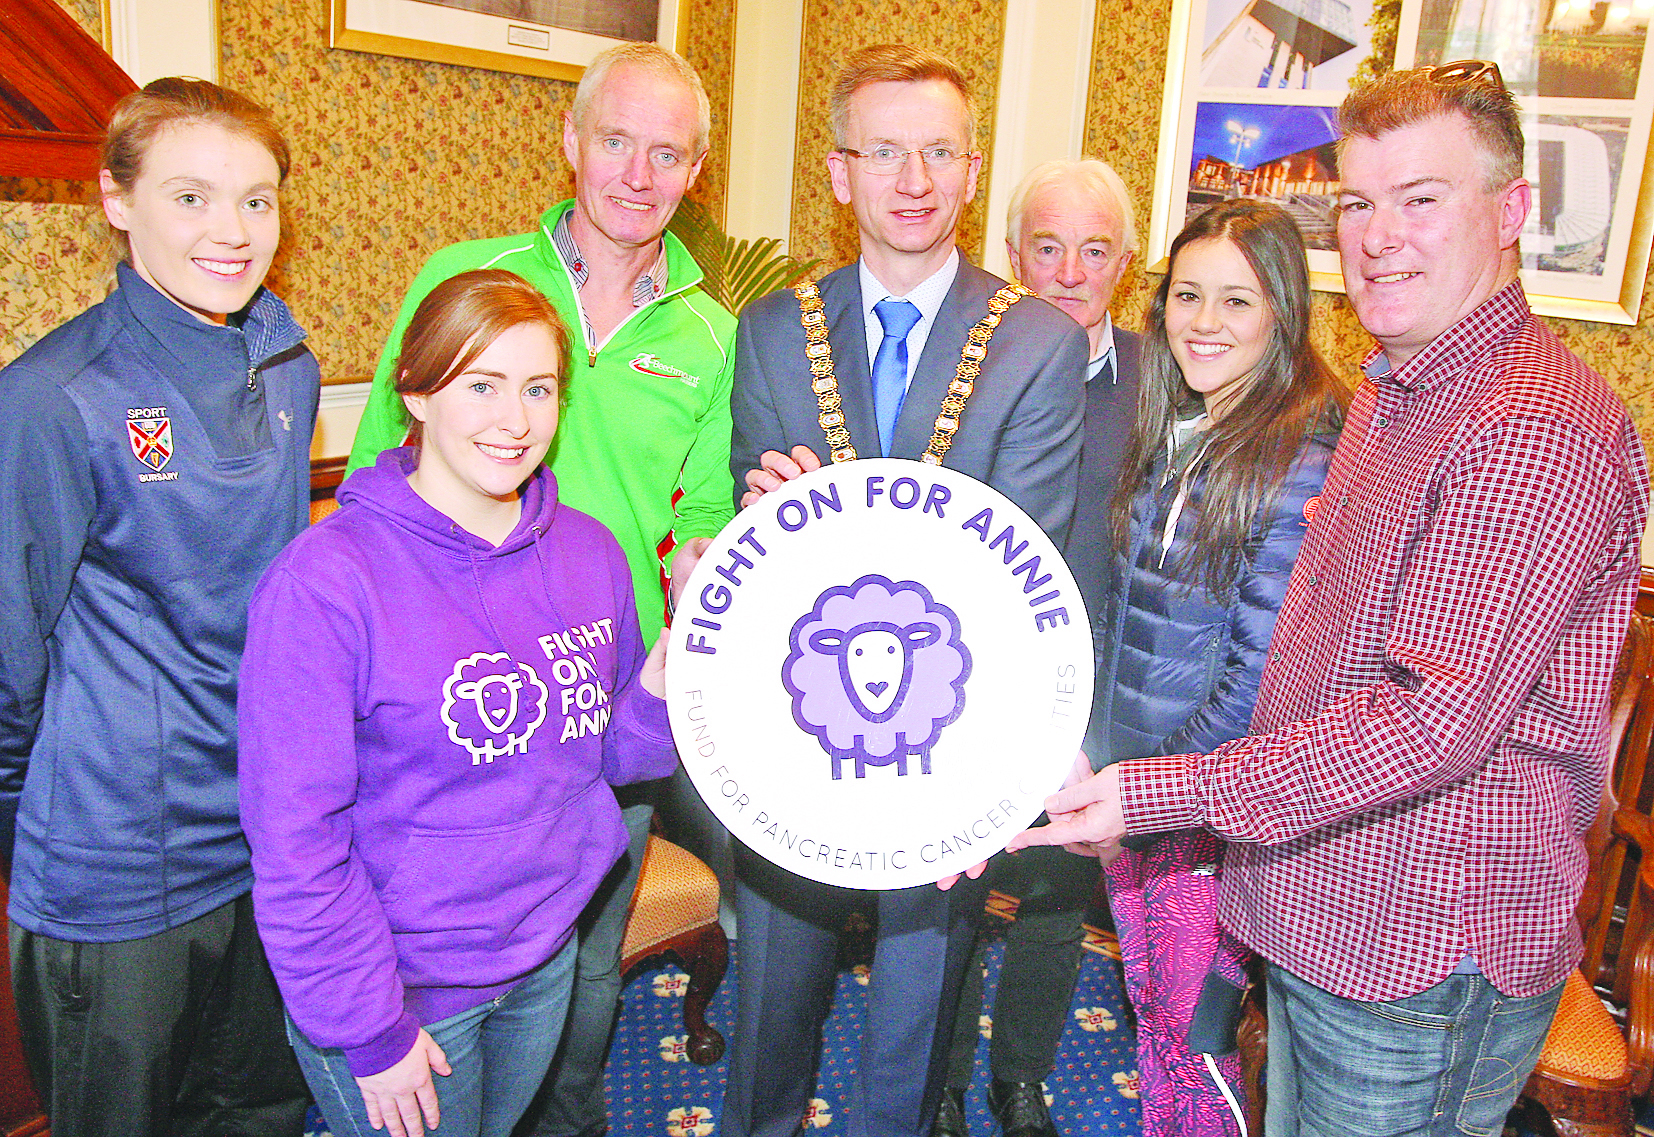 The launch of the 2017 Belfast International athletics meet at Belfast City Hall took place on Monday afternoon. Pictured are athletes Emma Mitchell and Christine McMahone, Michael Magee (Beechmount Harriers), Eamonn Christie (Race Director), Lord Mayor Brian Kingston, Grannie O\'Neill of the charity Fight on for Annie and Paul Magee of the charity Solas